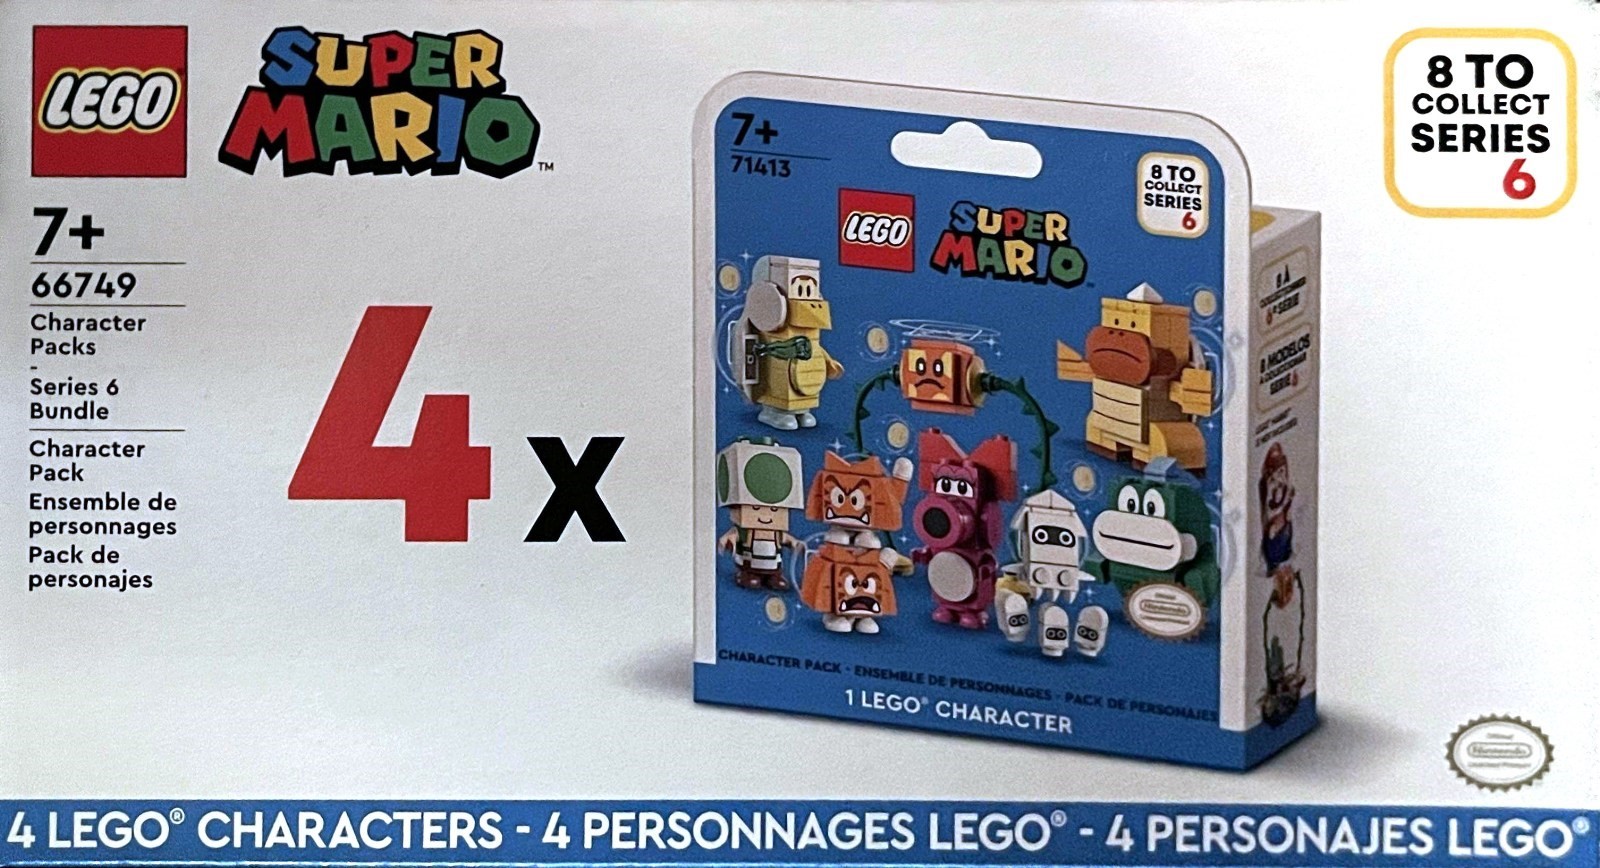 LEGO Super Mario Character Pack - Series 6